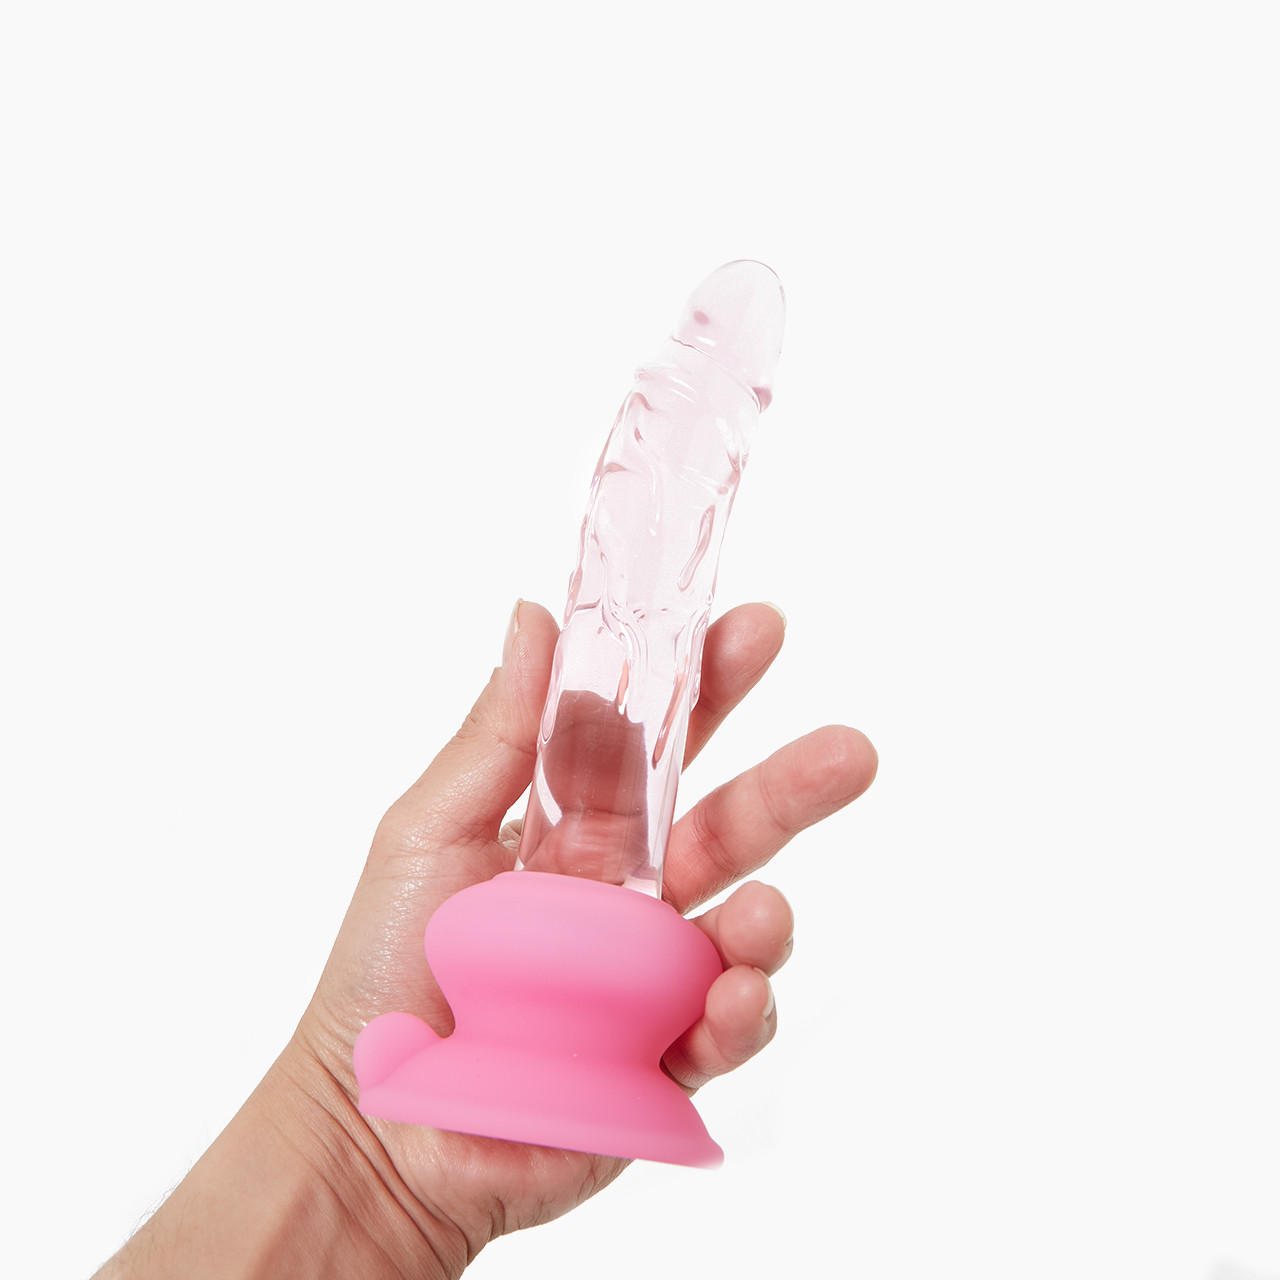 Hand holding a clear, textured Icicles No. 86 glass dildo